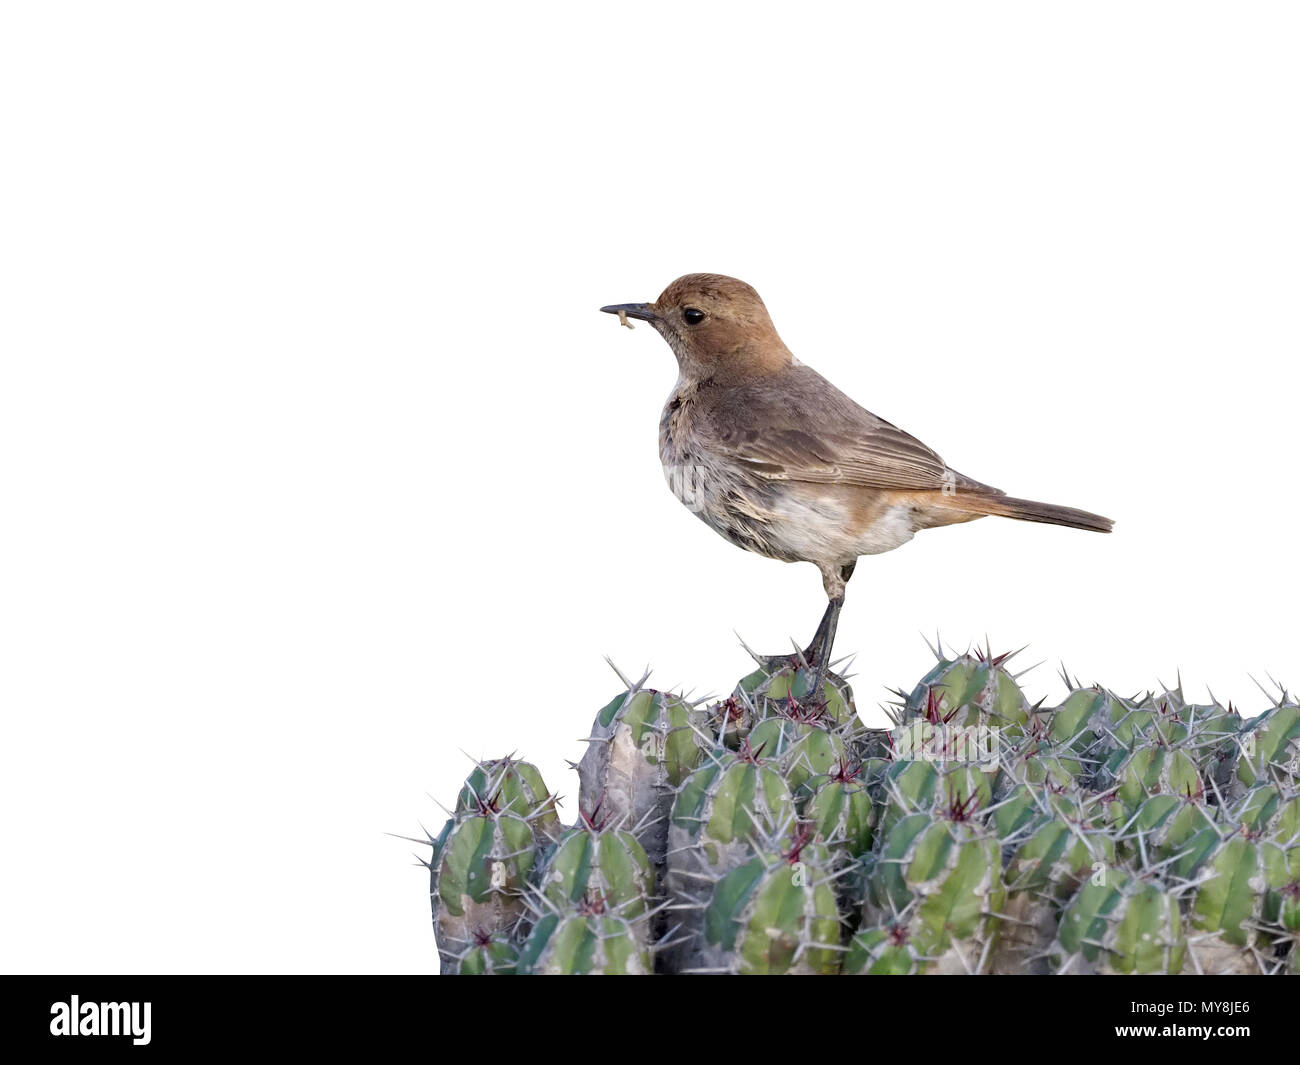 Red-rumped wheatear, Oenanthe moesta, single female on cactus, Morocco, March 2018 Stock Photo